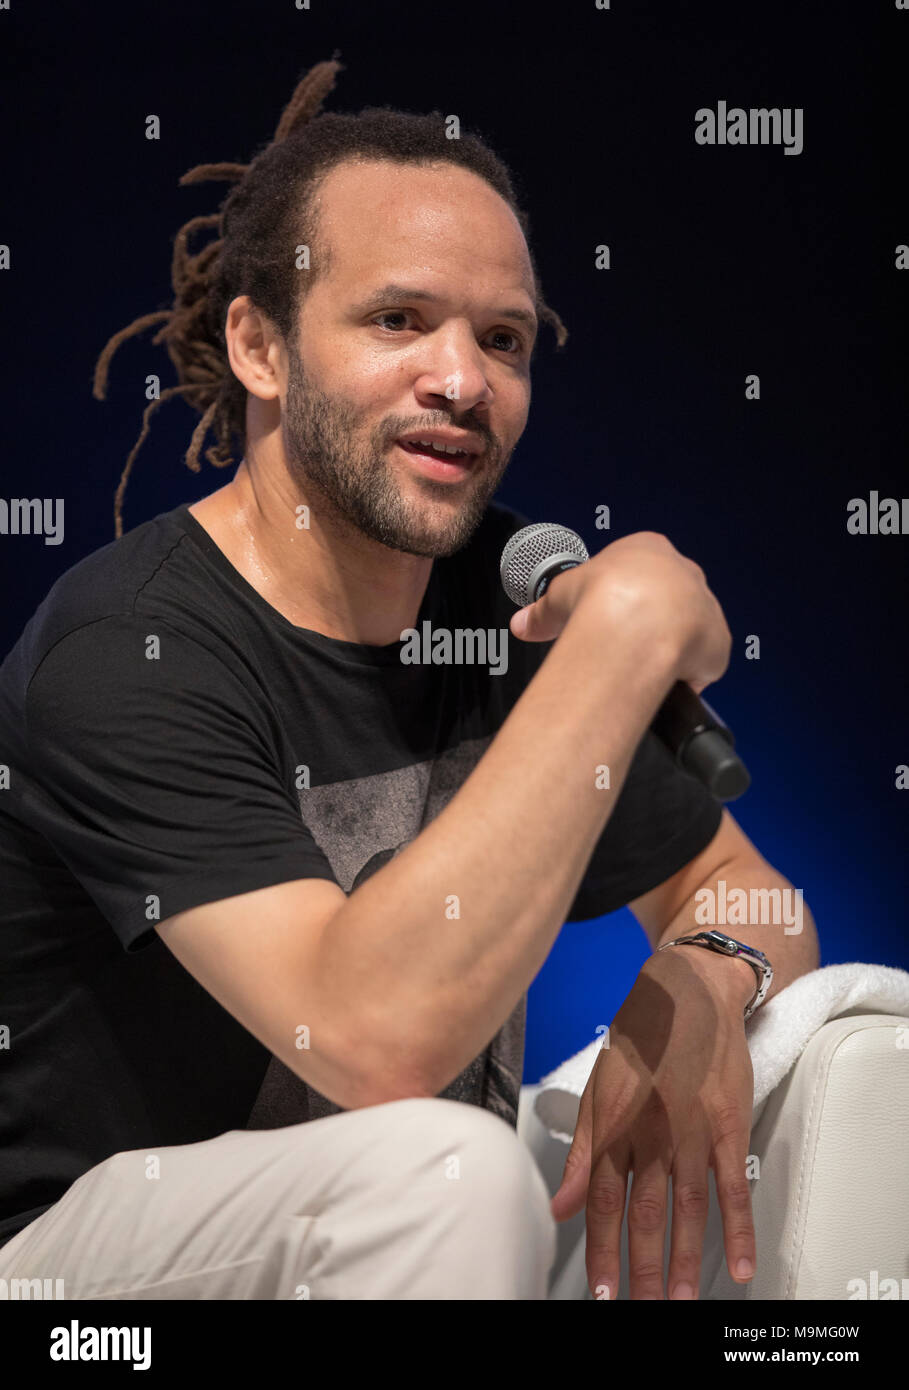 Savion Glover American tap dancer, actor, and choreographer attends the Cannes Lions Festival, June 20 2017 © ifnm Stock Photo